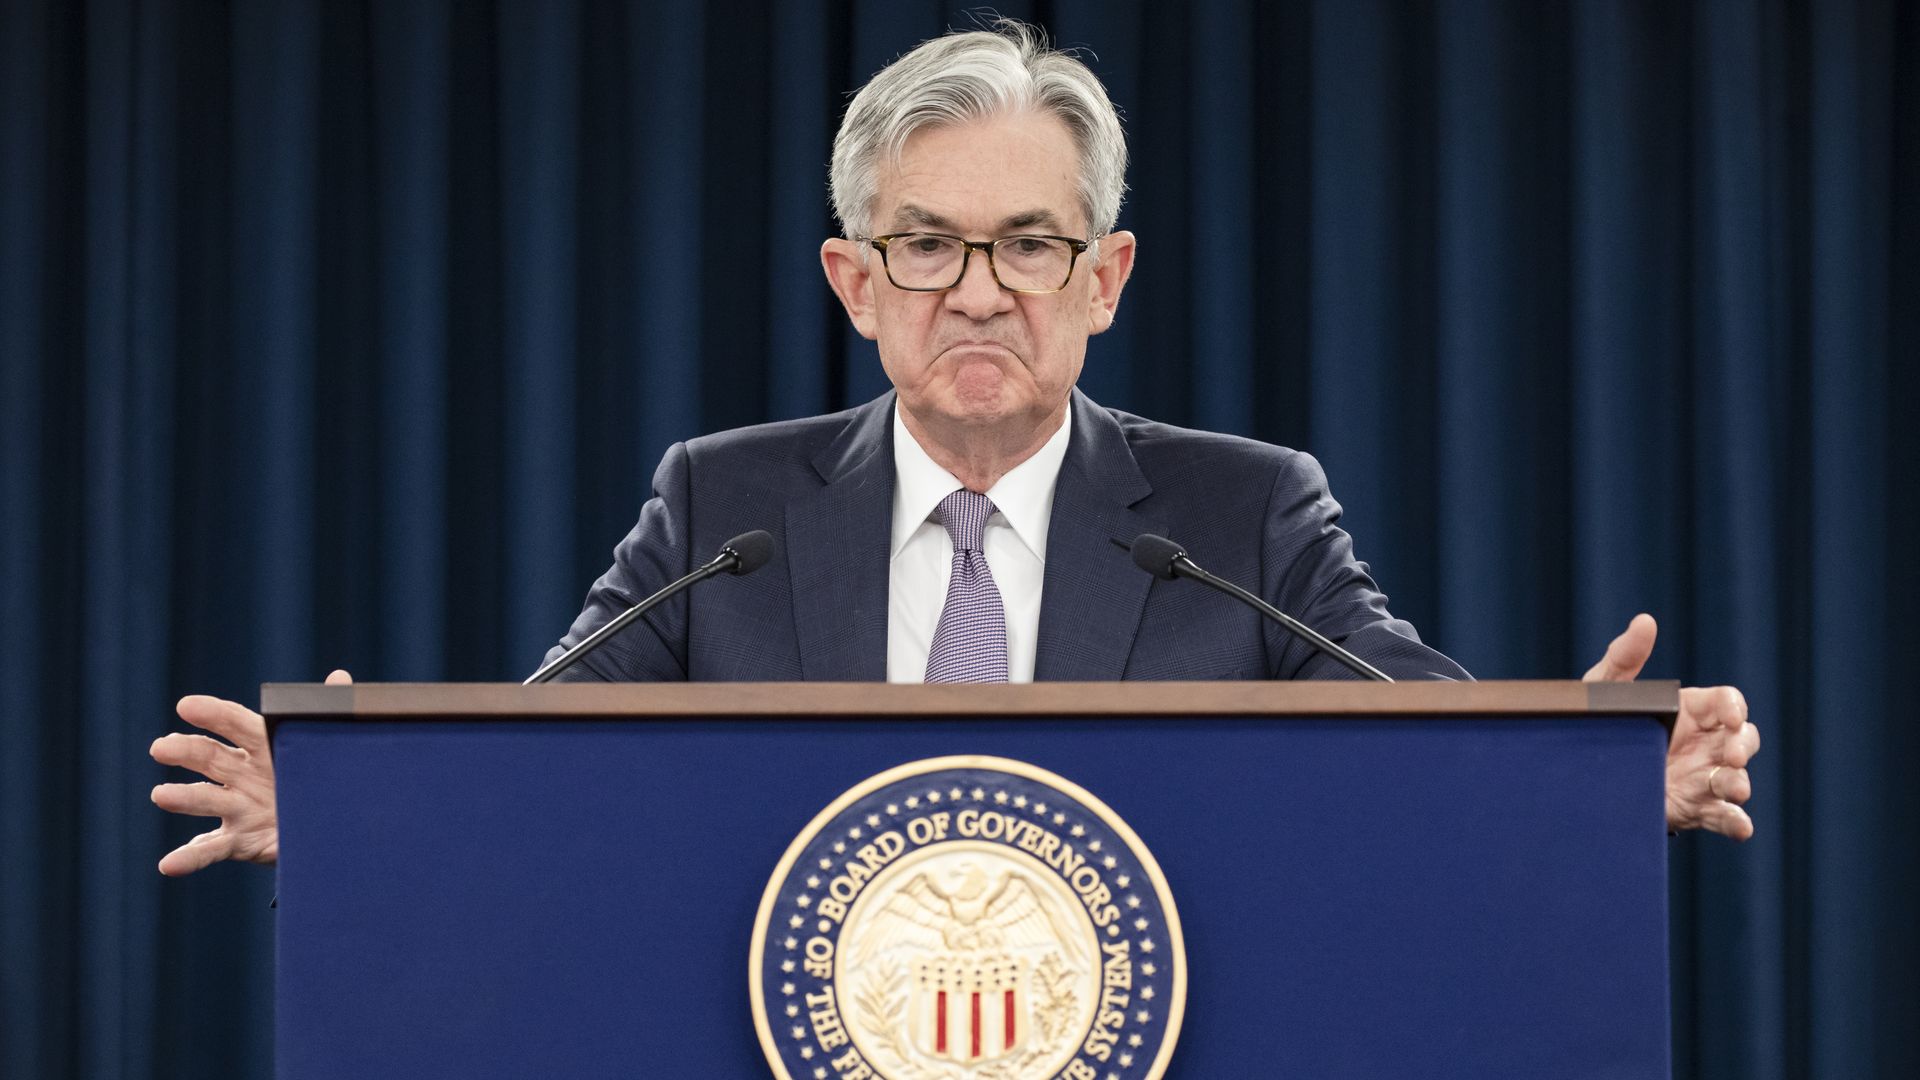 A photo of Fed chair Jerome Powell with his arms extended to flex on his haters.